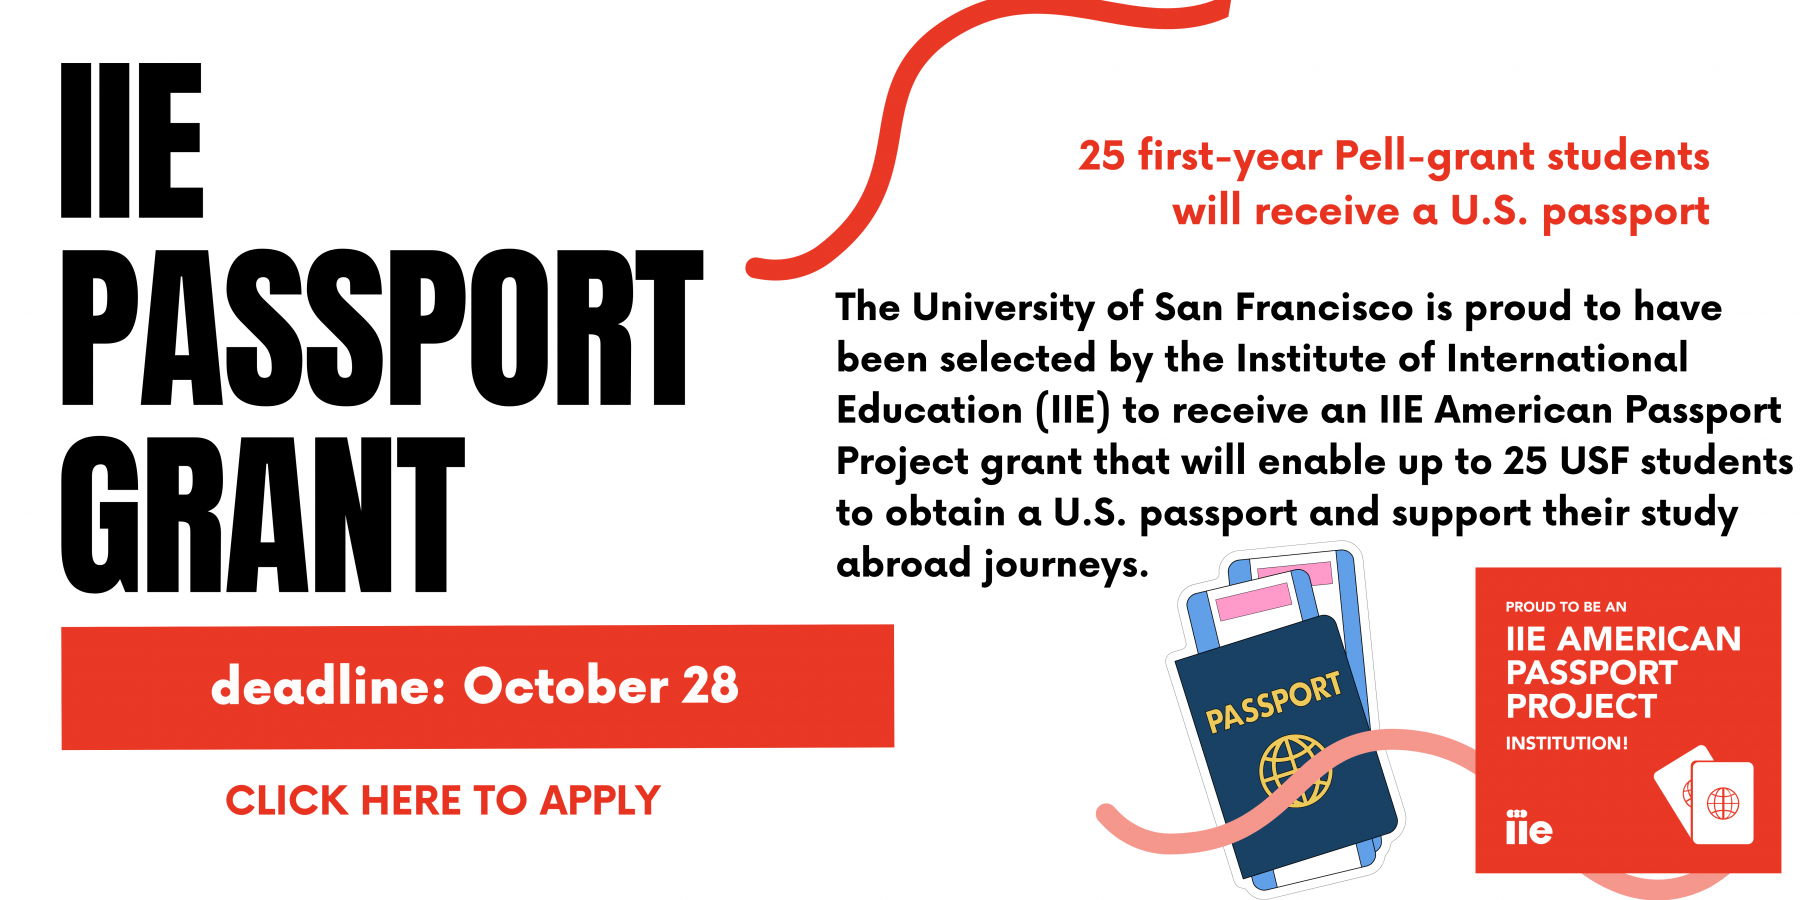 IIE American Passport Grant available for 25 first-year Pell-grant students